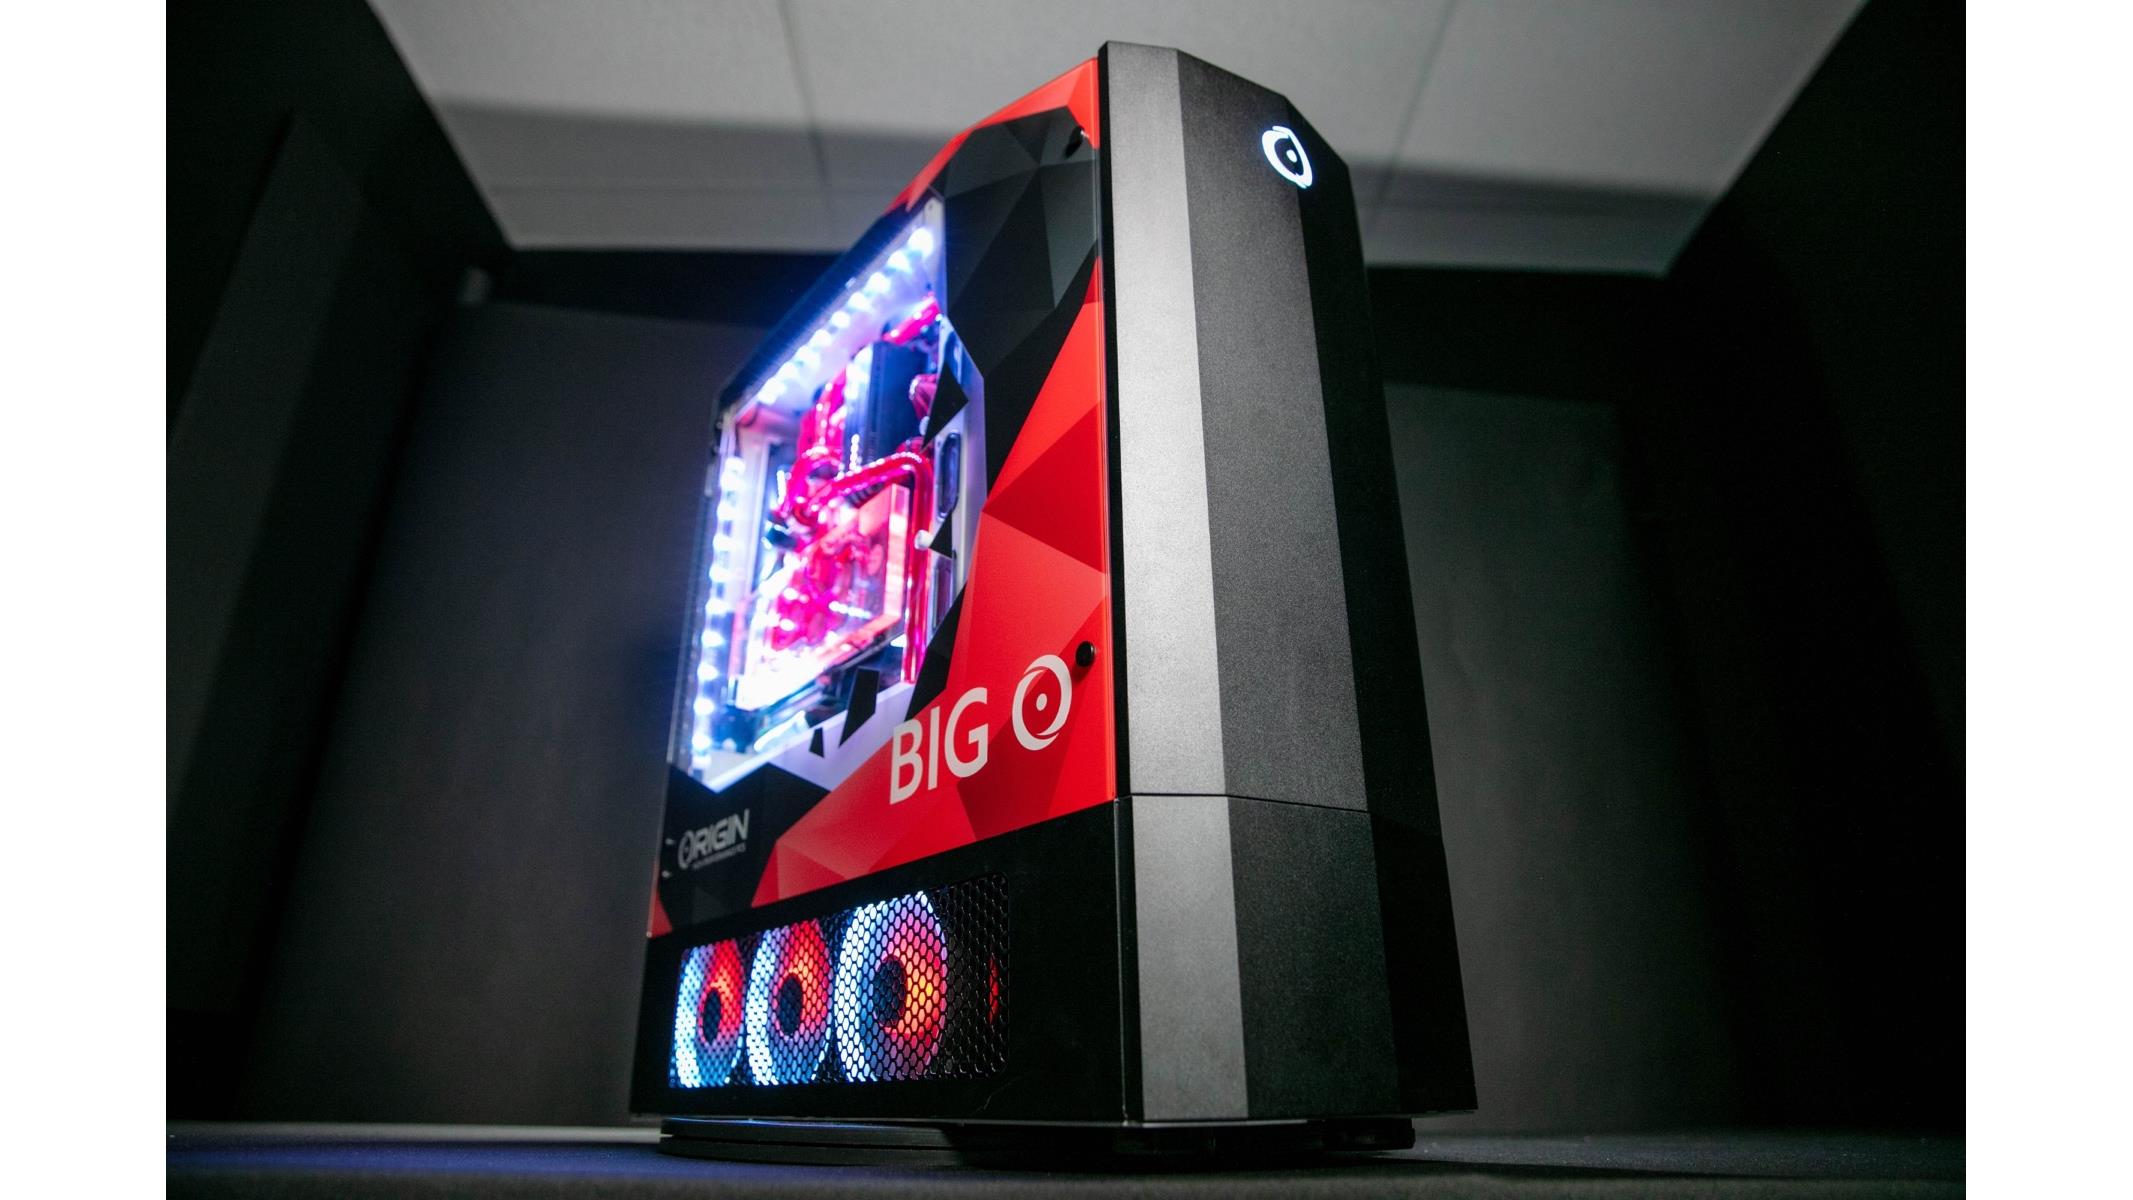 Menda City gevolg ontwikkeling Origin PC Gives Us A 'Big O' With Its Badass Hybrid PC, Xbox One, PS4 And  Switch Gaming Tower | HotHardware